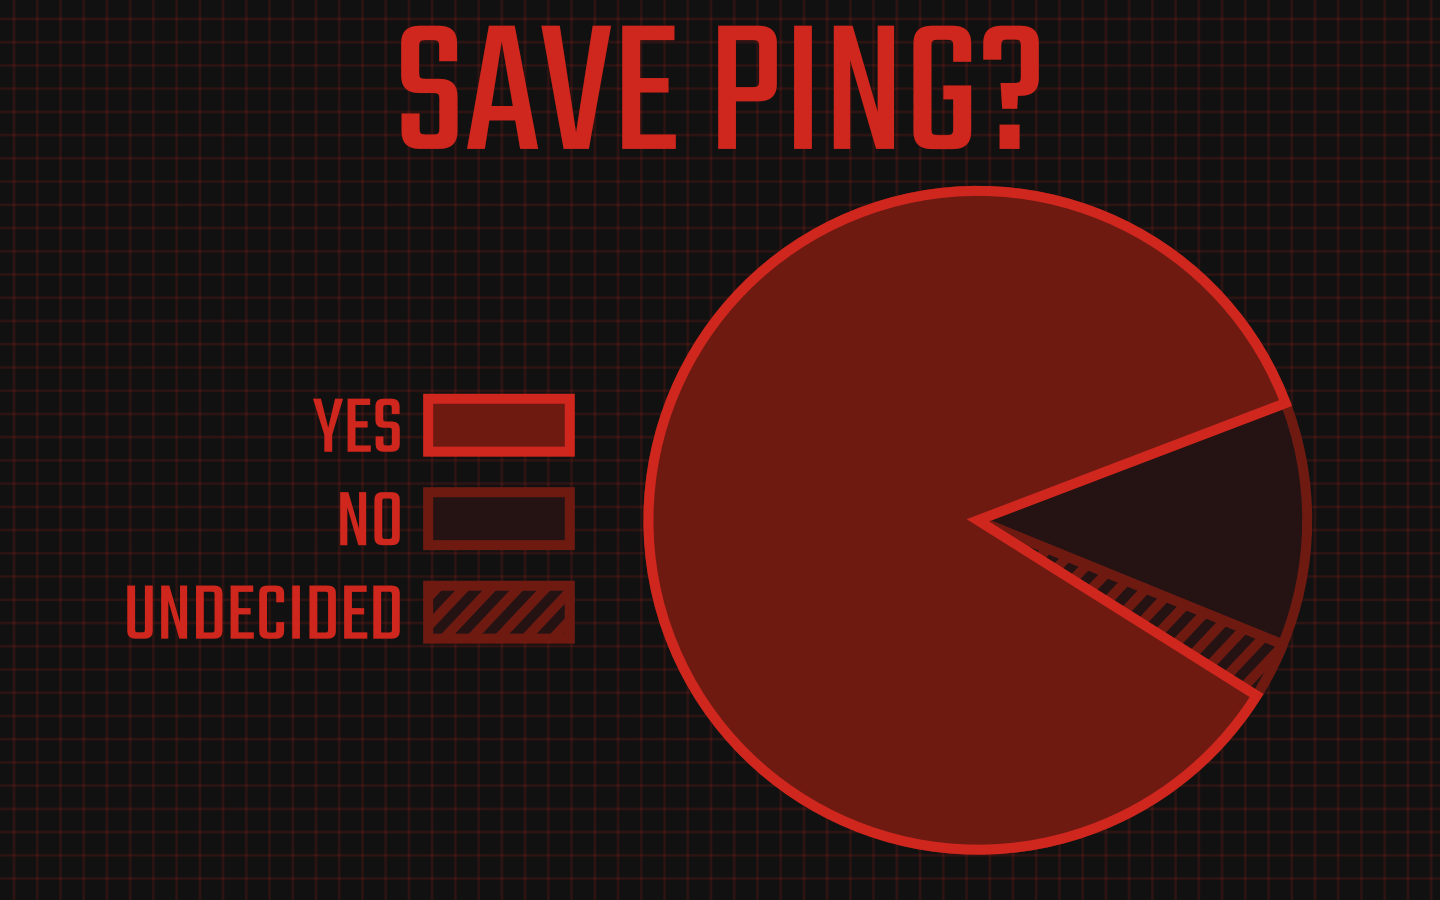 A pie chart showing the results of the viewer poll. Of 334 respondents, 285 voted to save Ping, 39 voted against, and 10 were undecided.